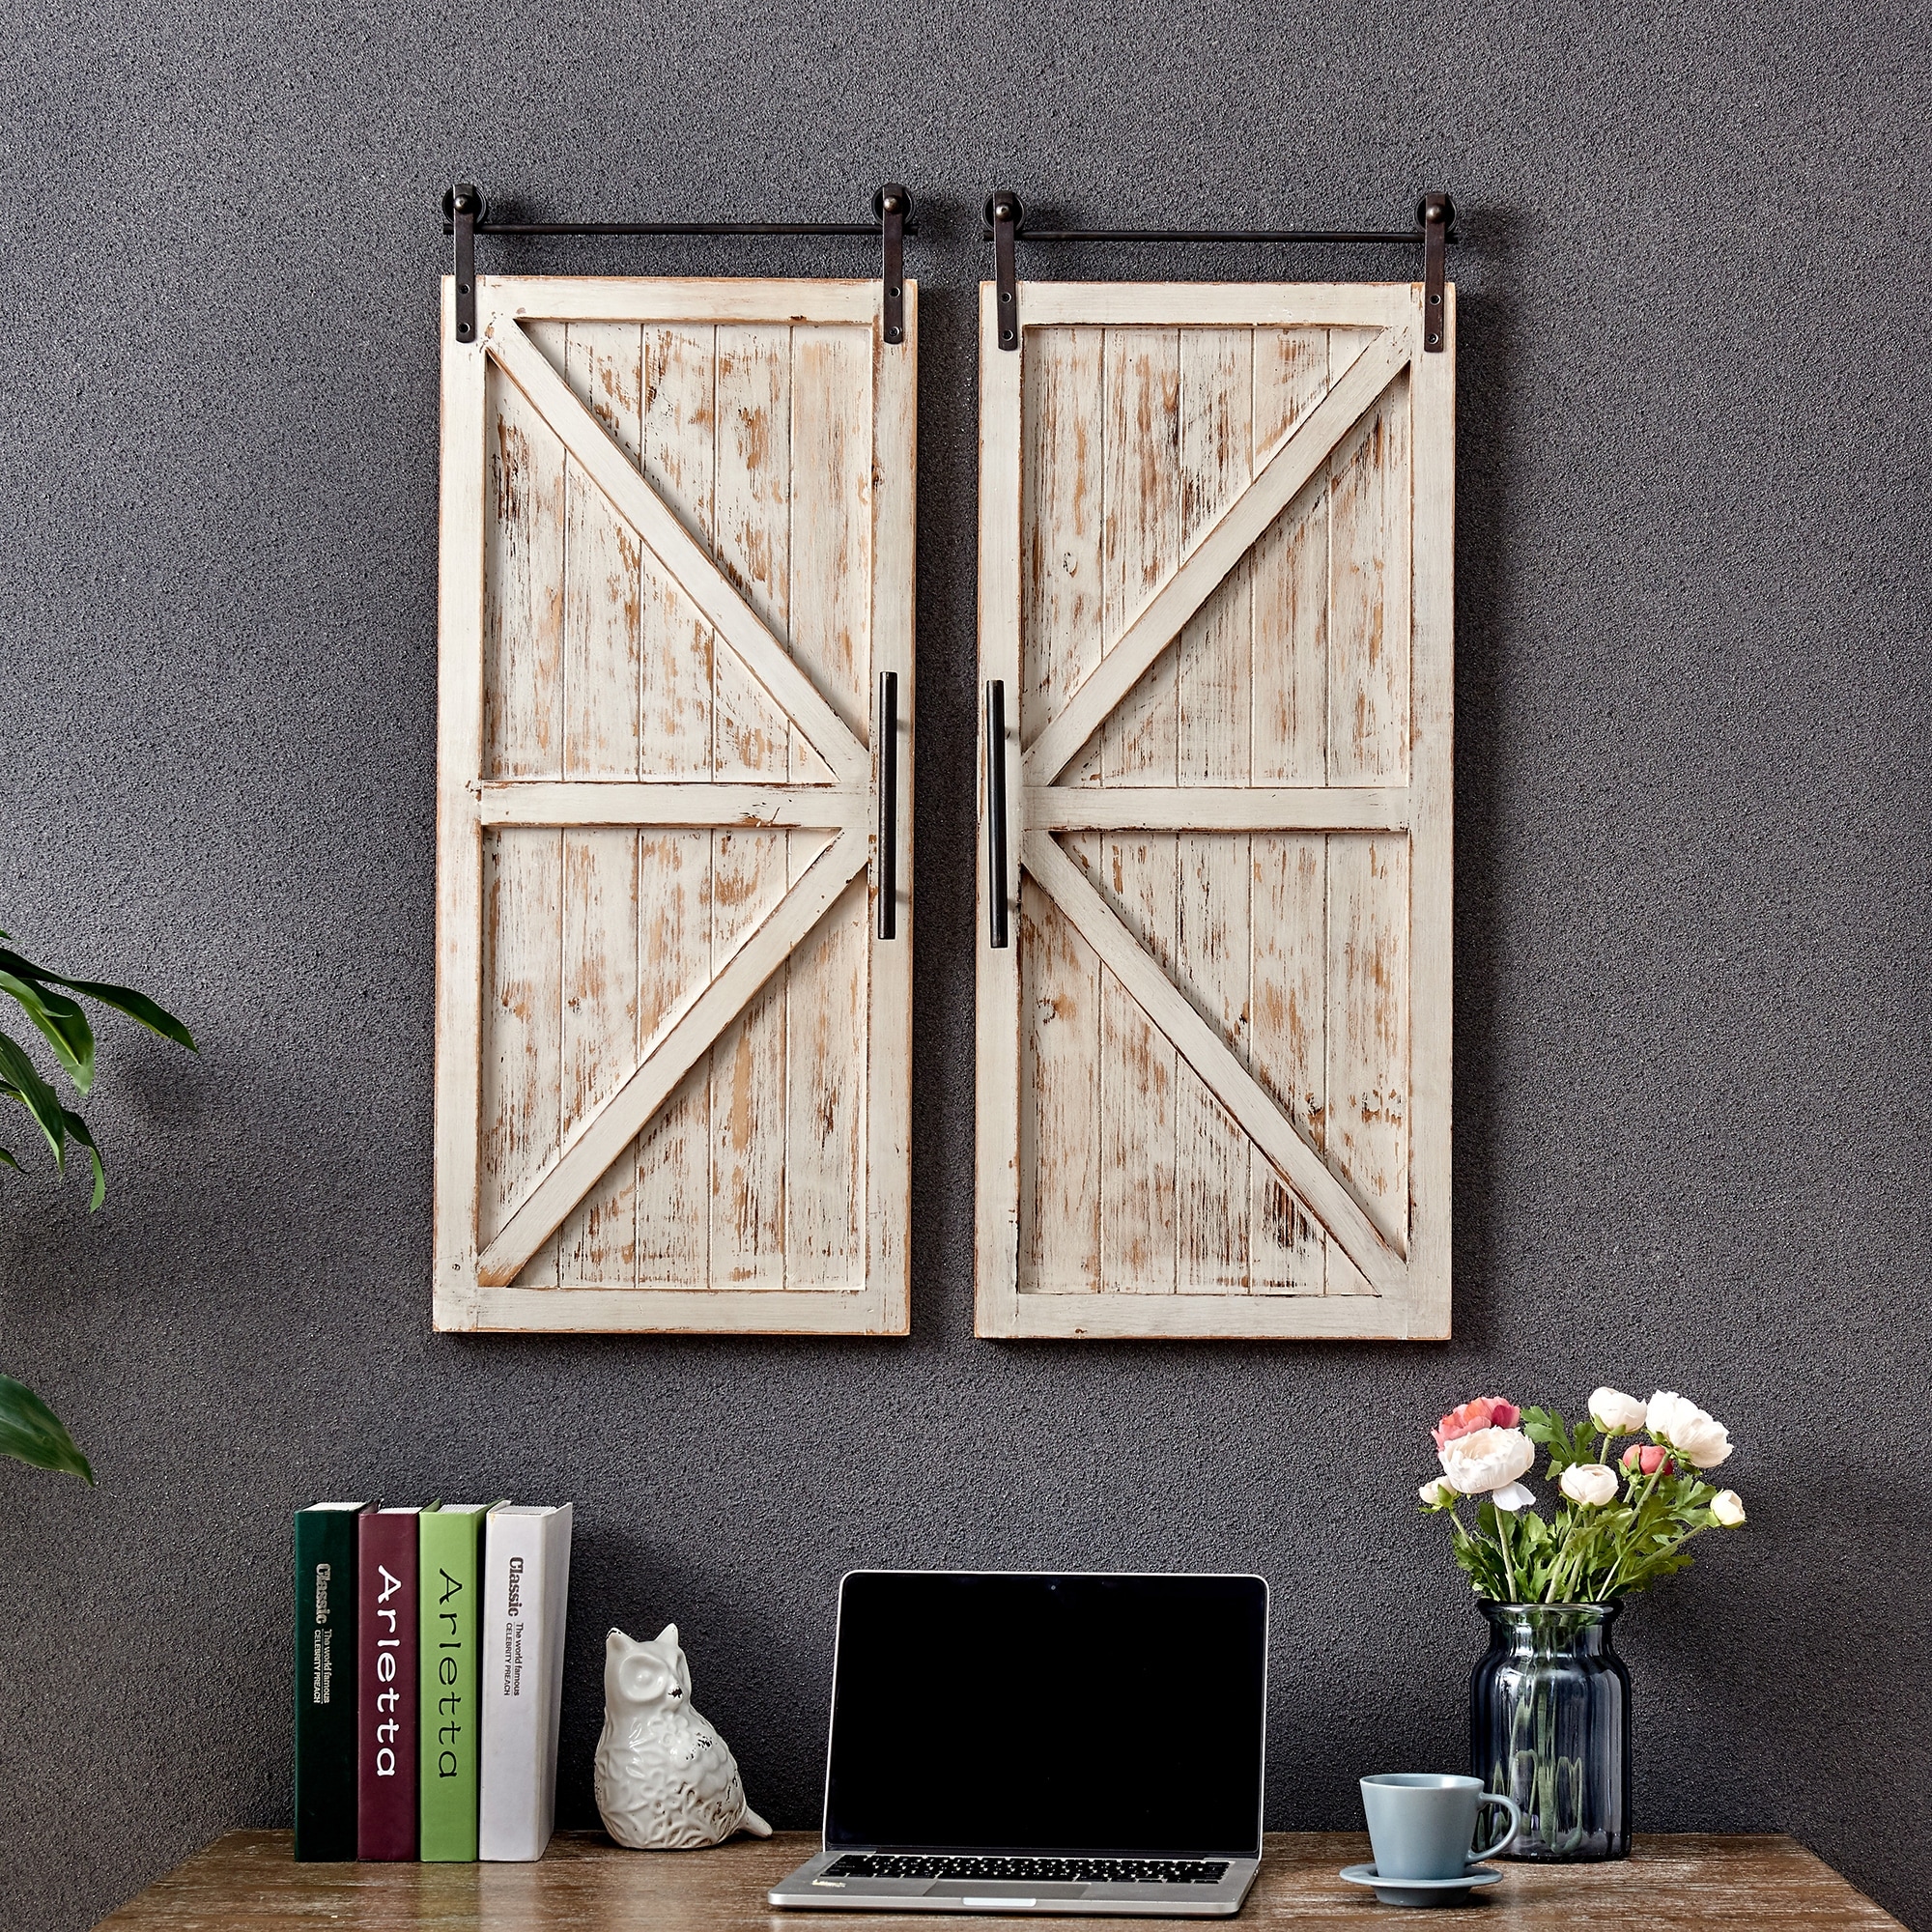 FirsTime  Co. 2-pc. Wooden Barn Door Wall Plaque Set On Sale Bed Bath   Beyond 28010923